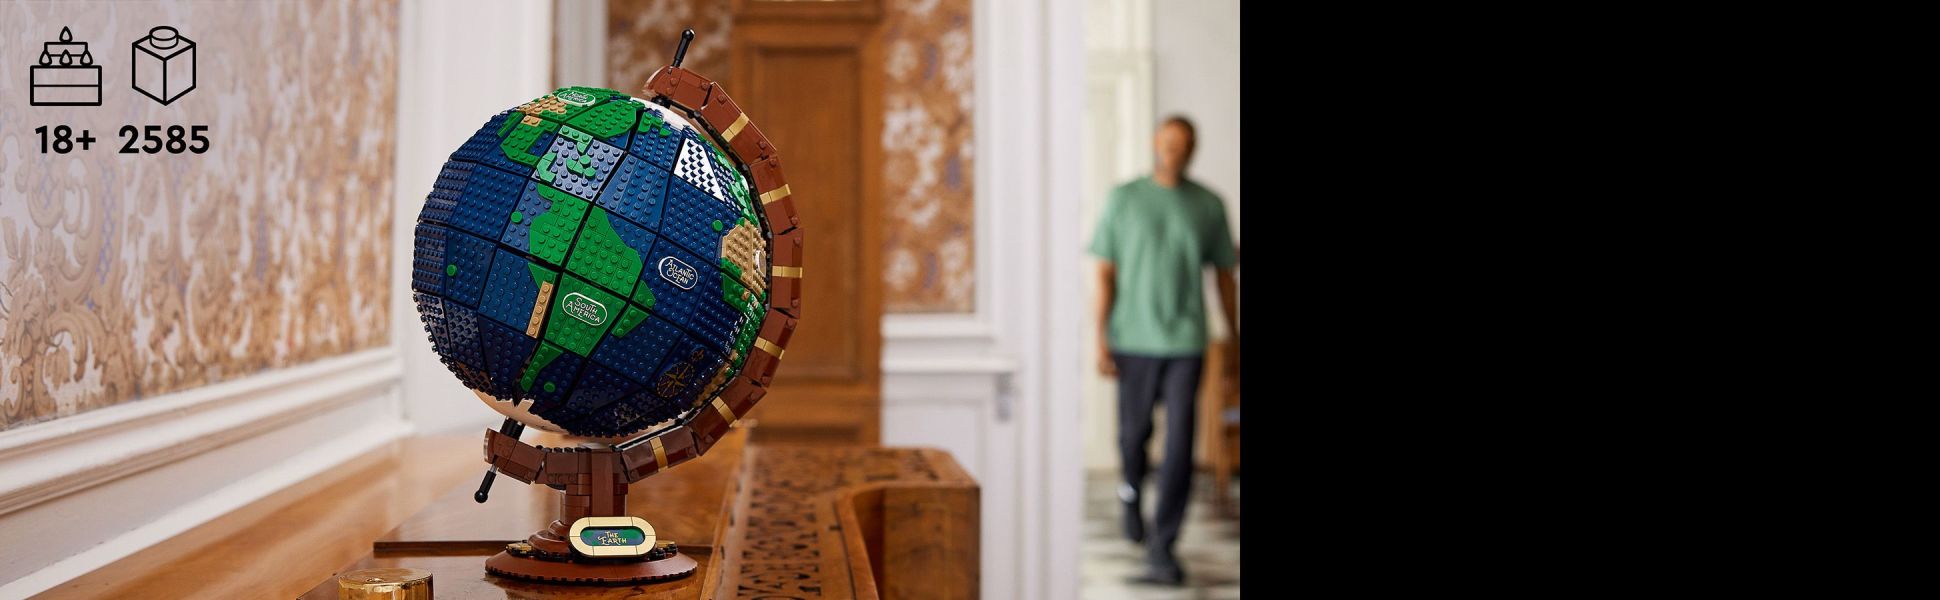 LEGO Ideas The Globe Building Set, Build and Display Model for